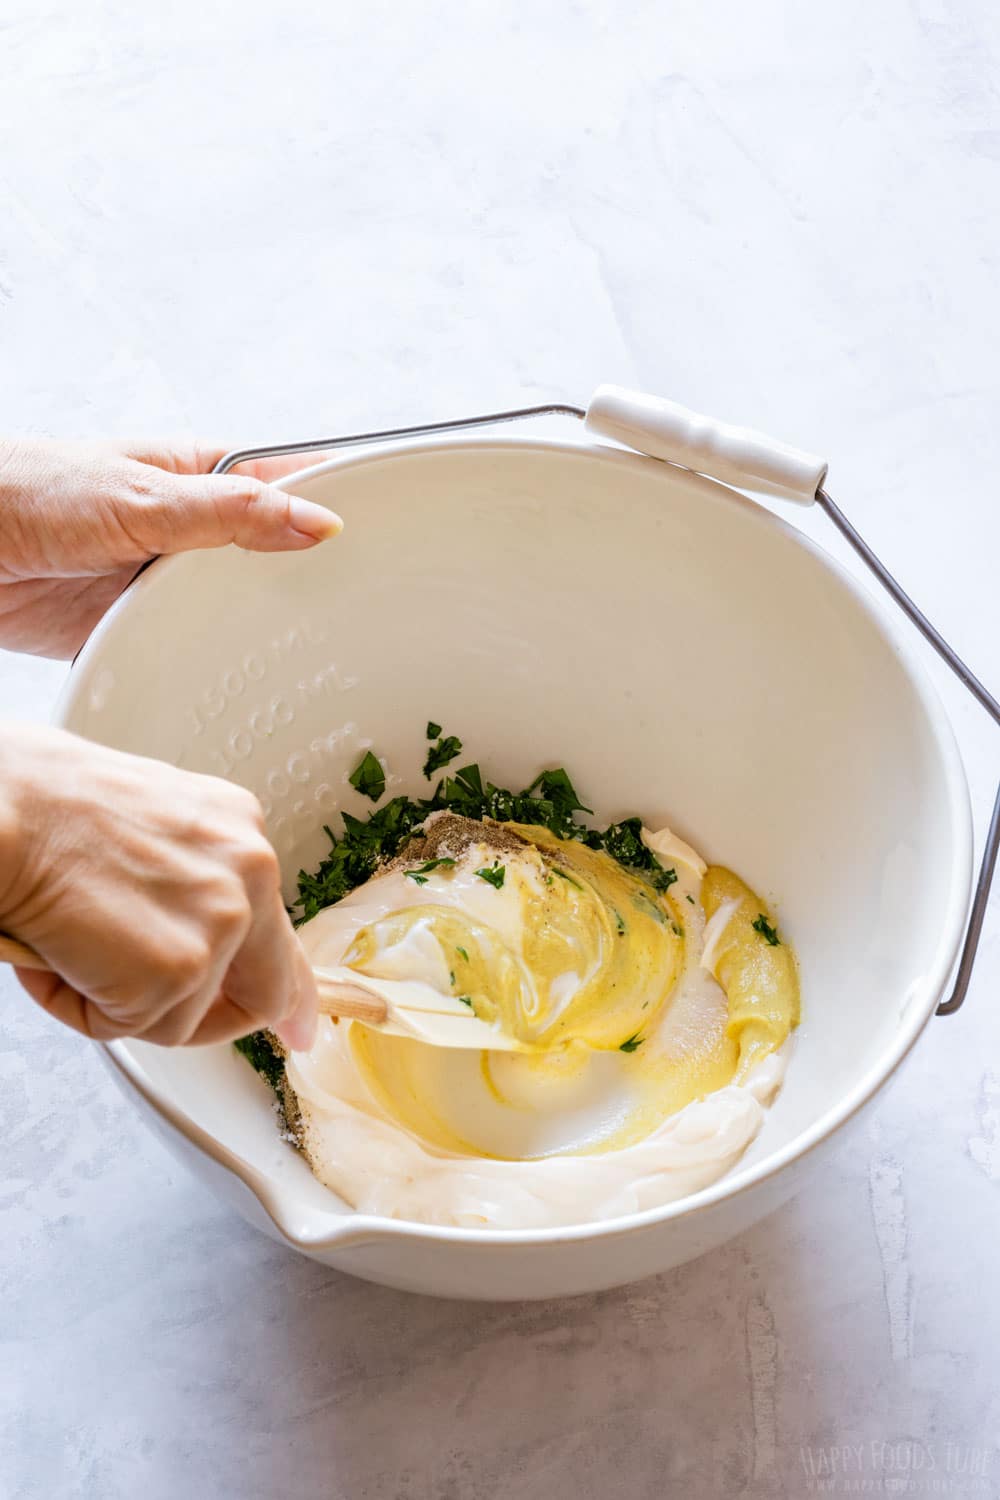 Combining mayonnaise, mustard, salt, black pepper, sugar and parsley in a large mixing bowl.